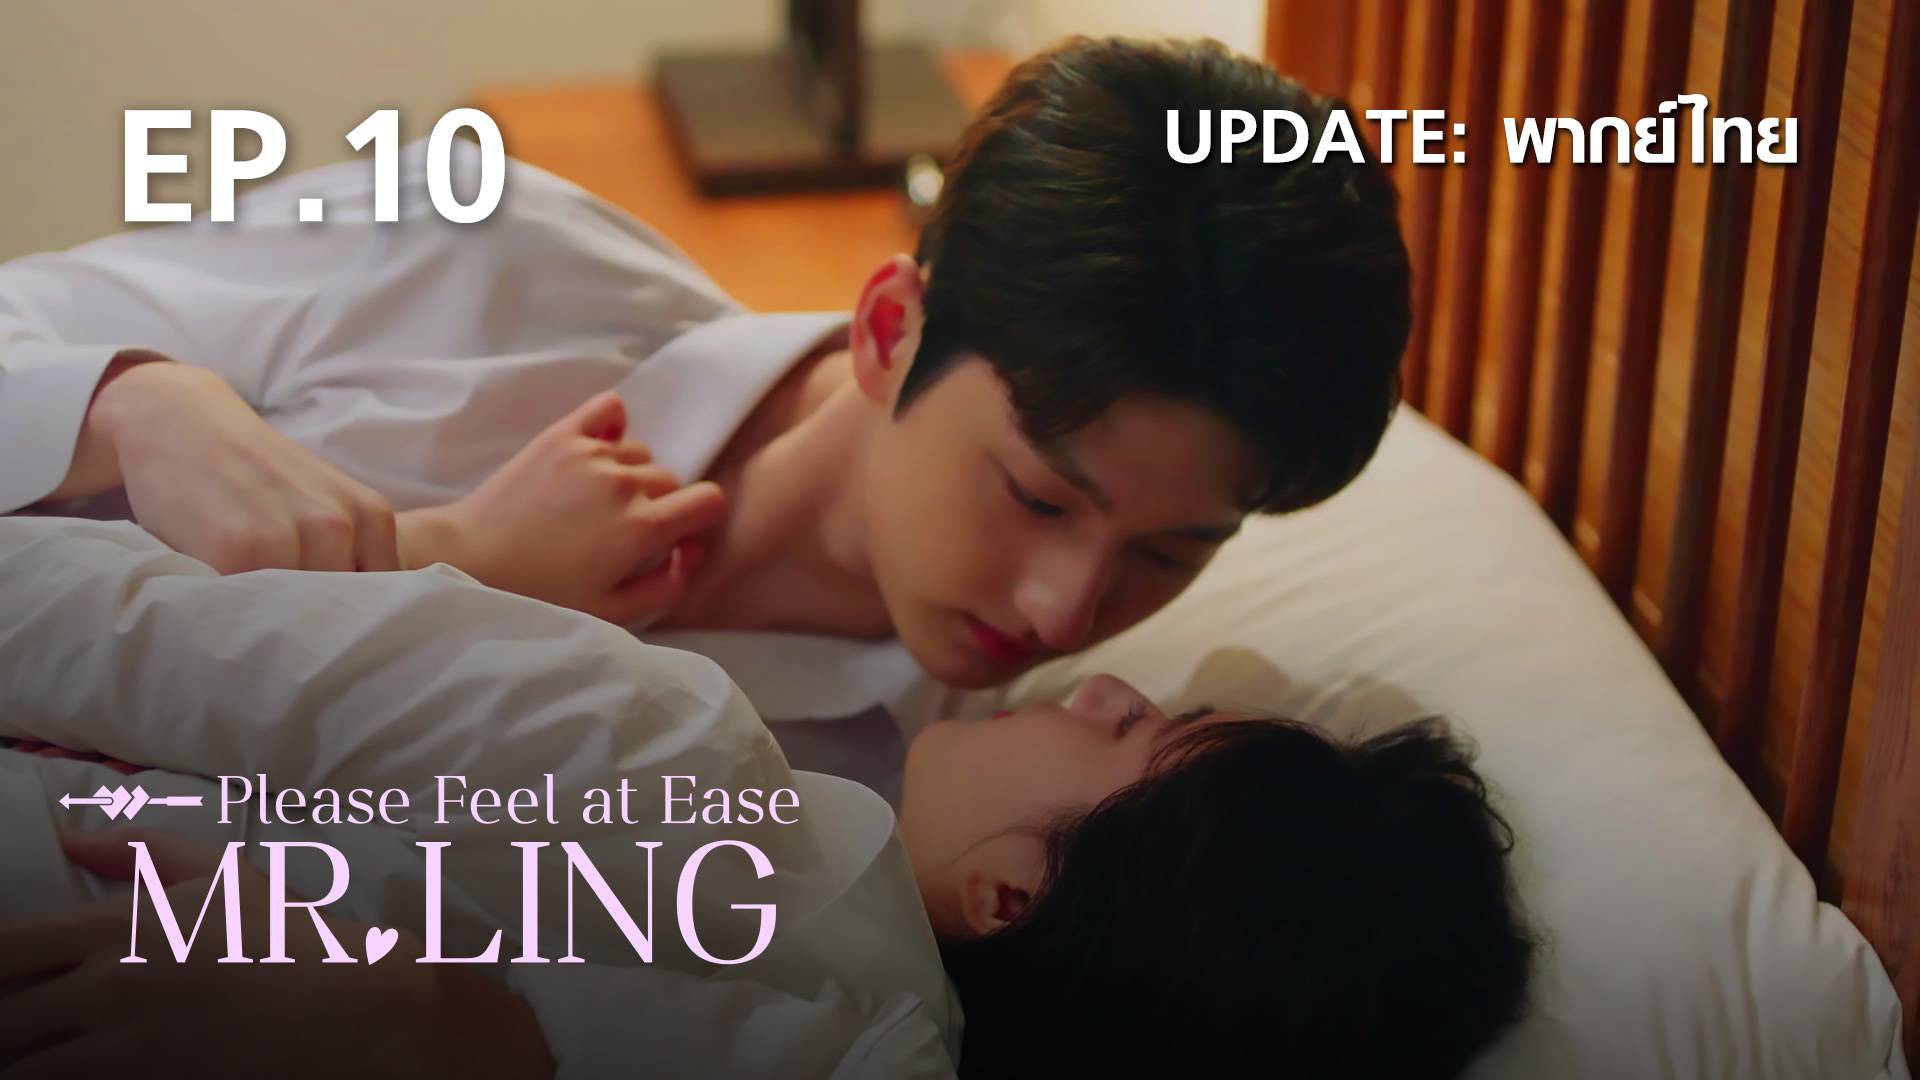 Ep 01 Please Feel At Ease Mr Ling Watch Series Online